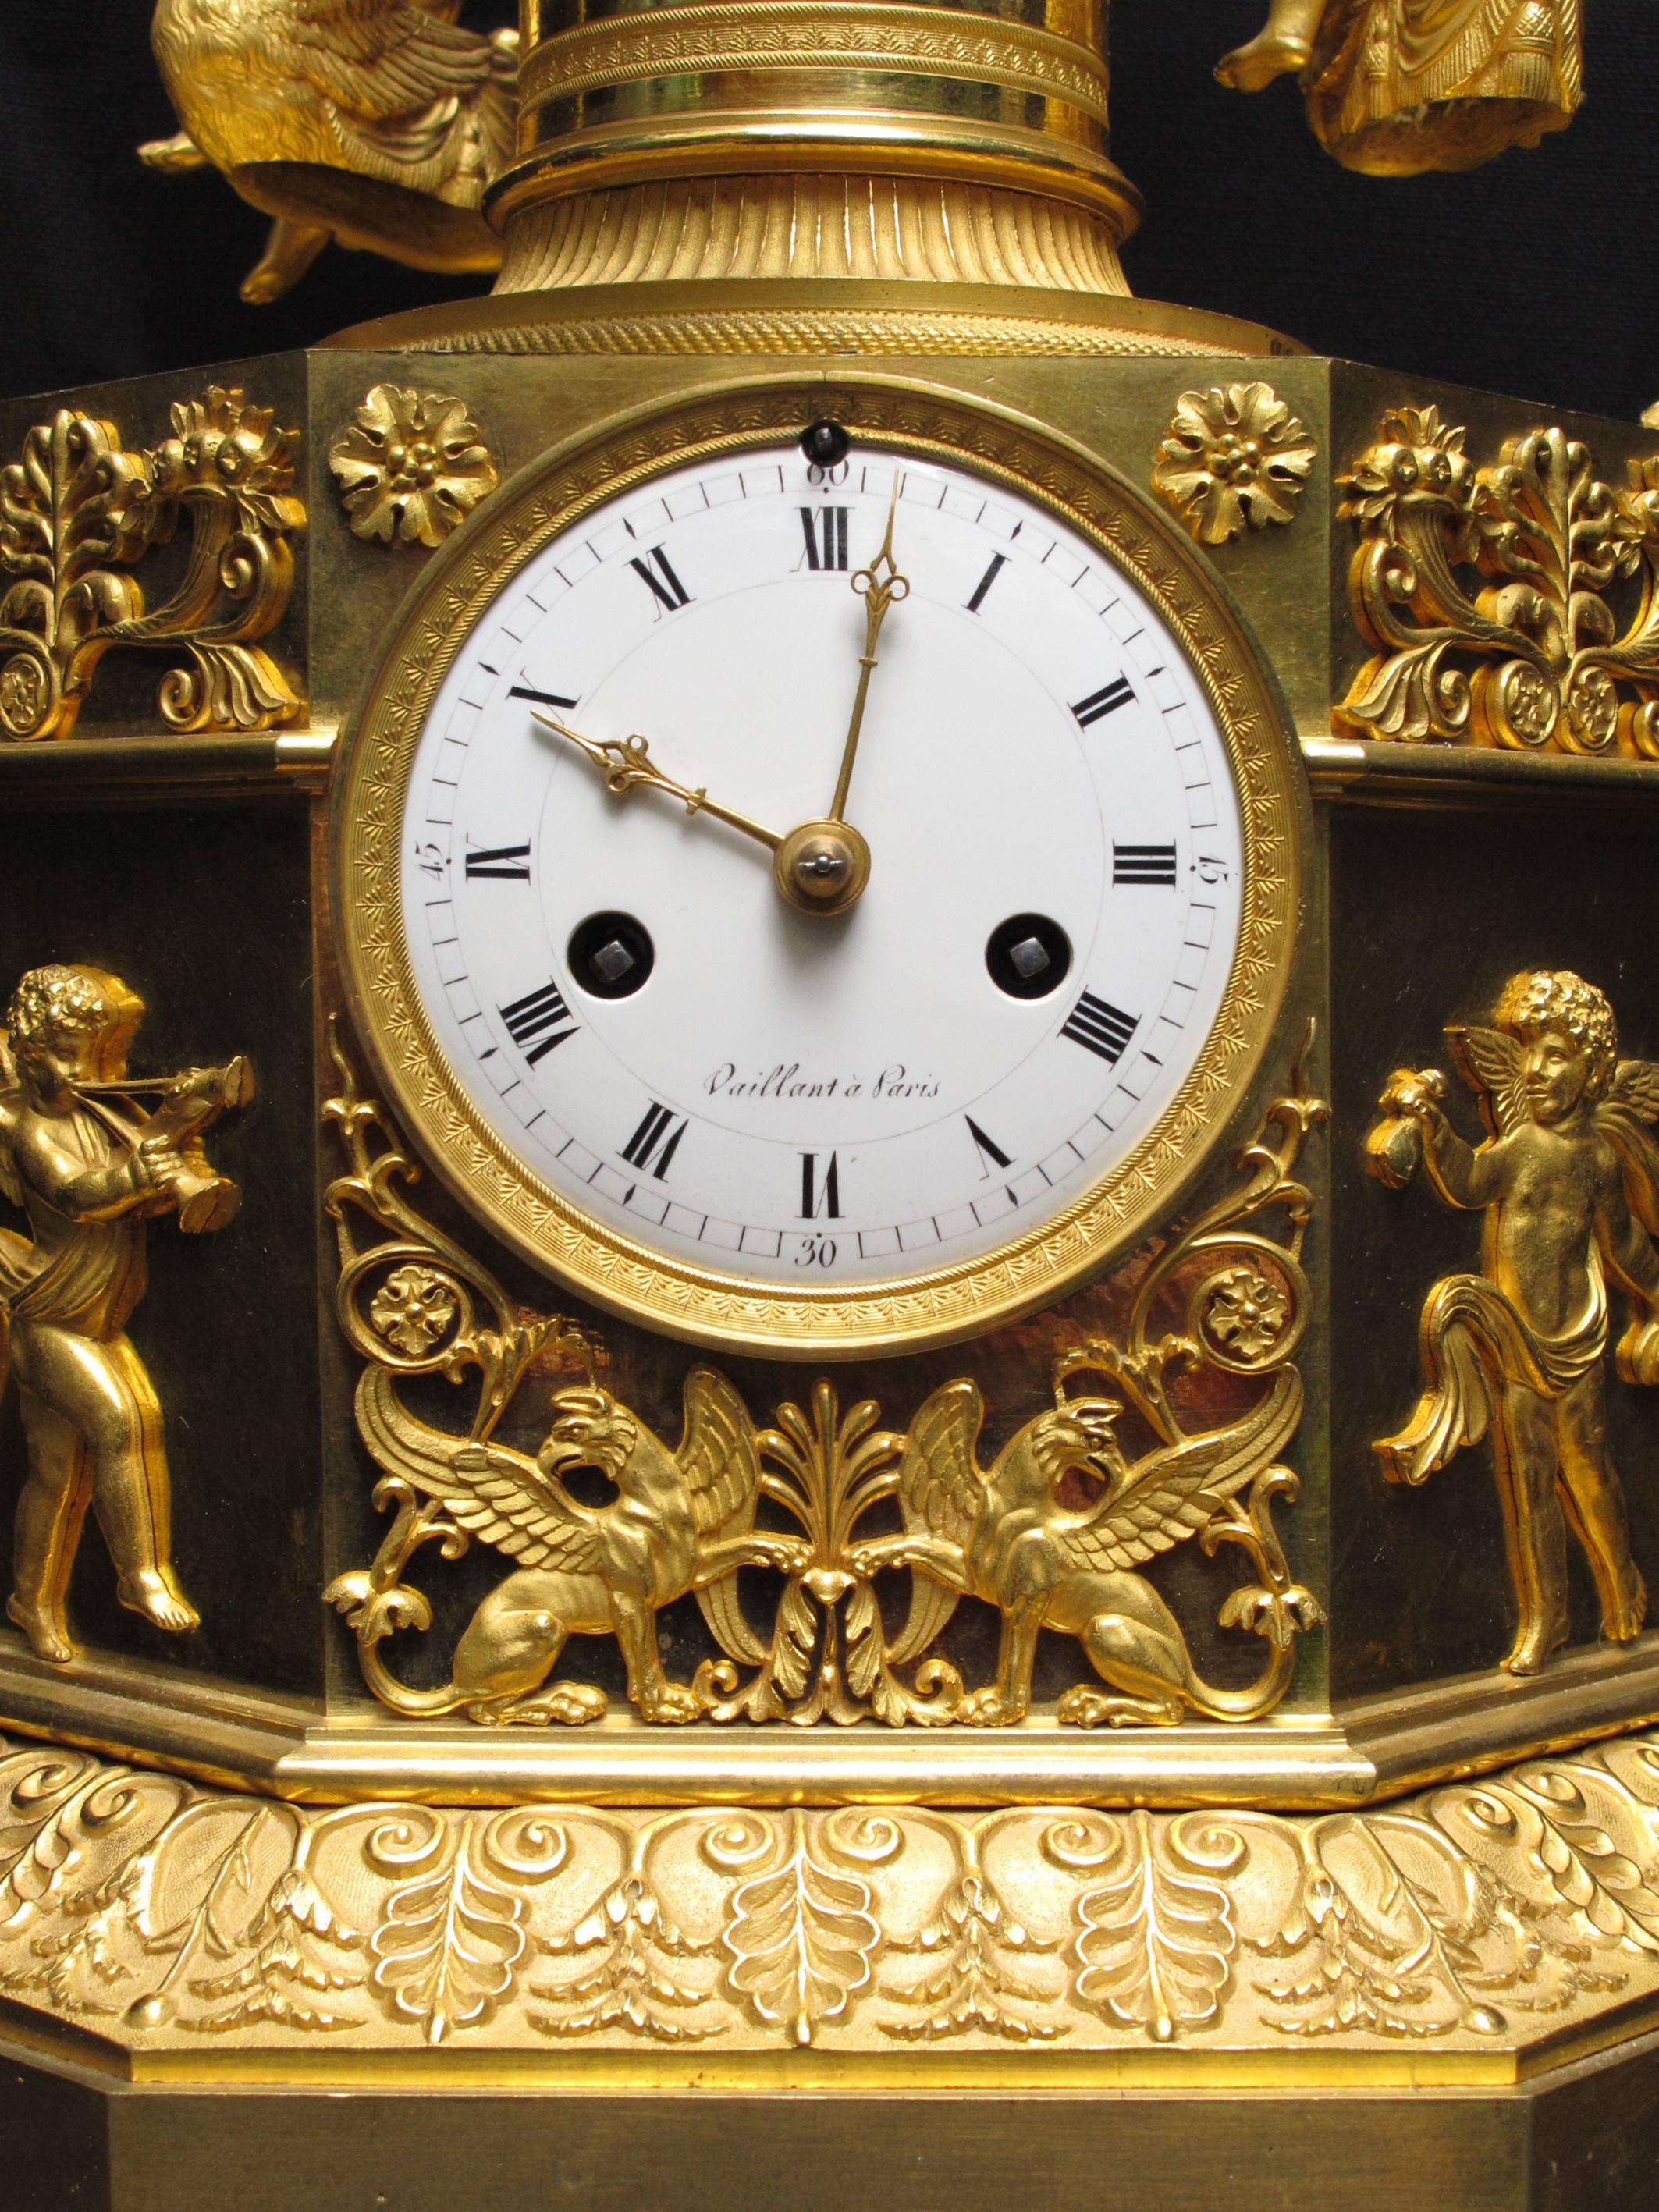 This very rare Empire ormolu automaton carousel clock is signed on the dial "Vaillant à Paris" for the clockmaker Louis-Jacques Vaillant († after 1817 ; master on Februar 12, 1787)

The elongated octagonal plinth case is decorated with